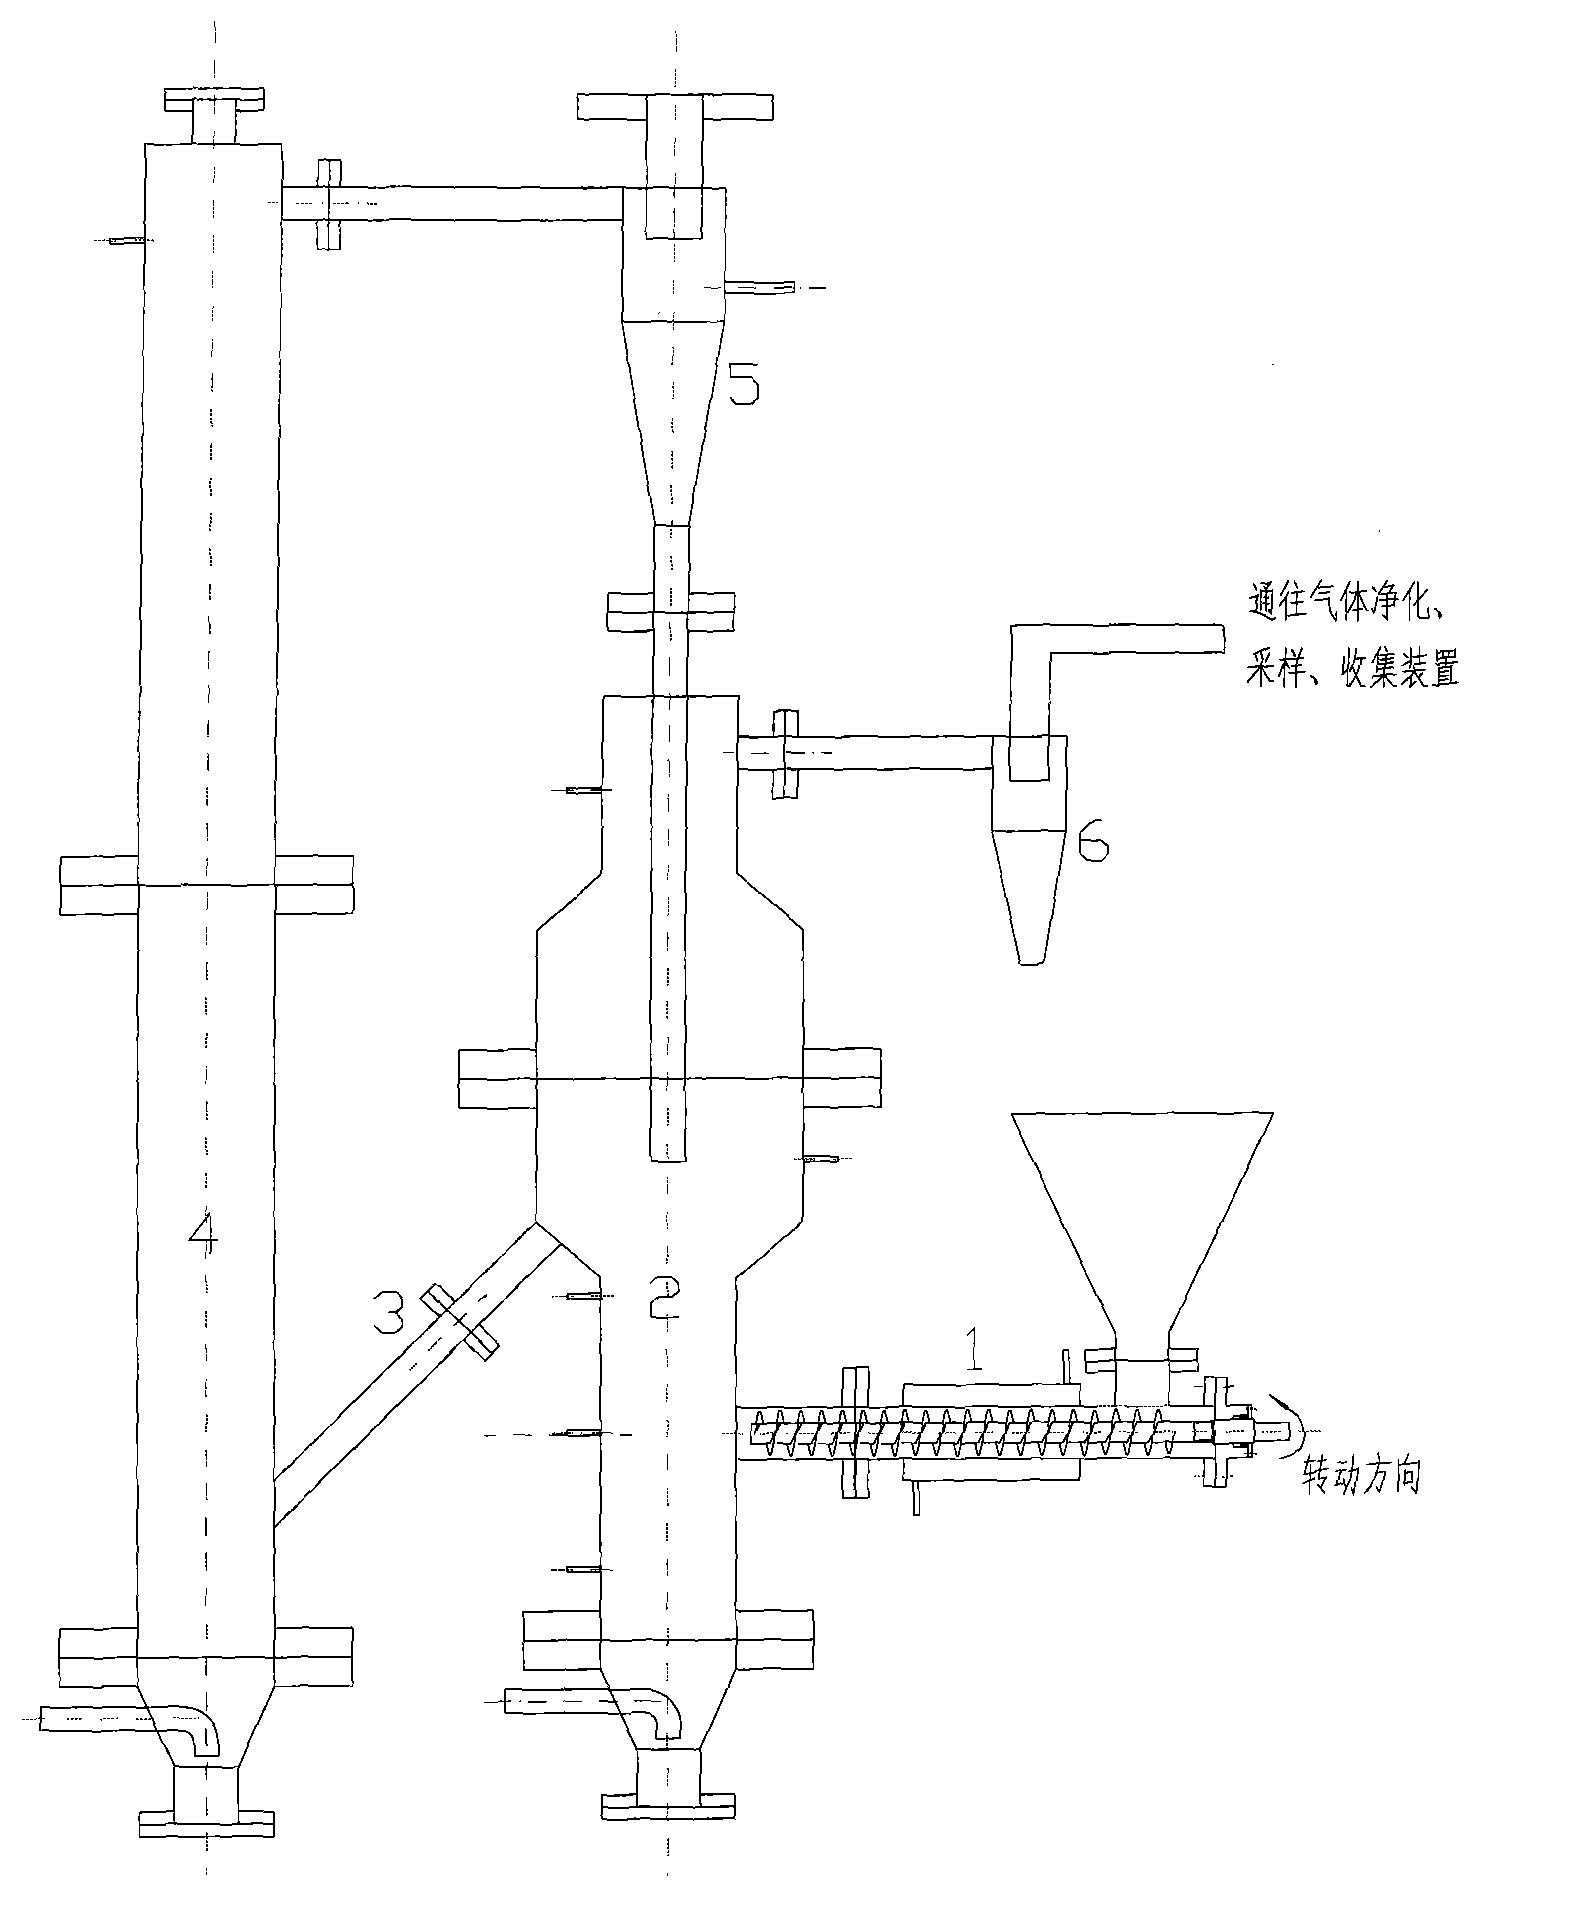 Method for producing synthesis gas by combustible solid waste chemical chain gasification and interconnected fluidized bed reactor